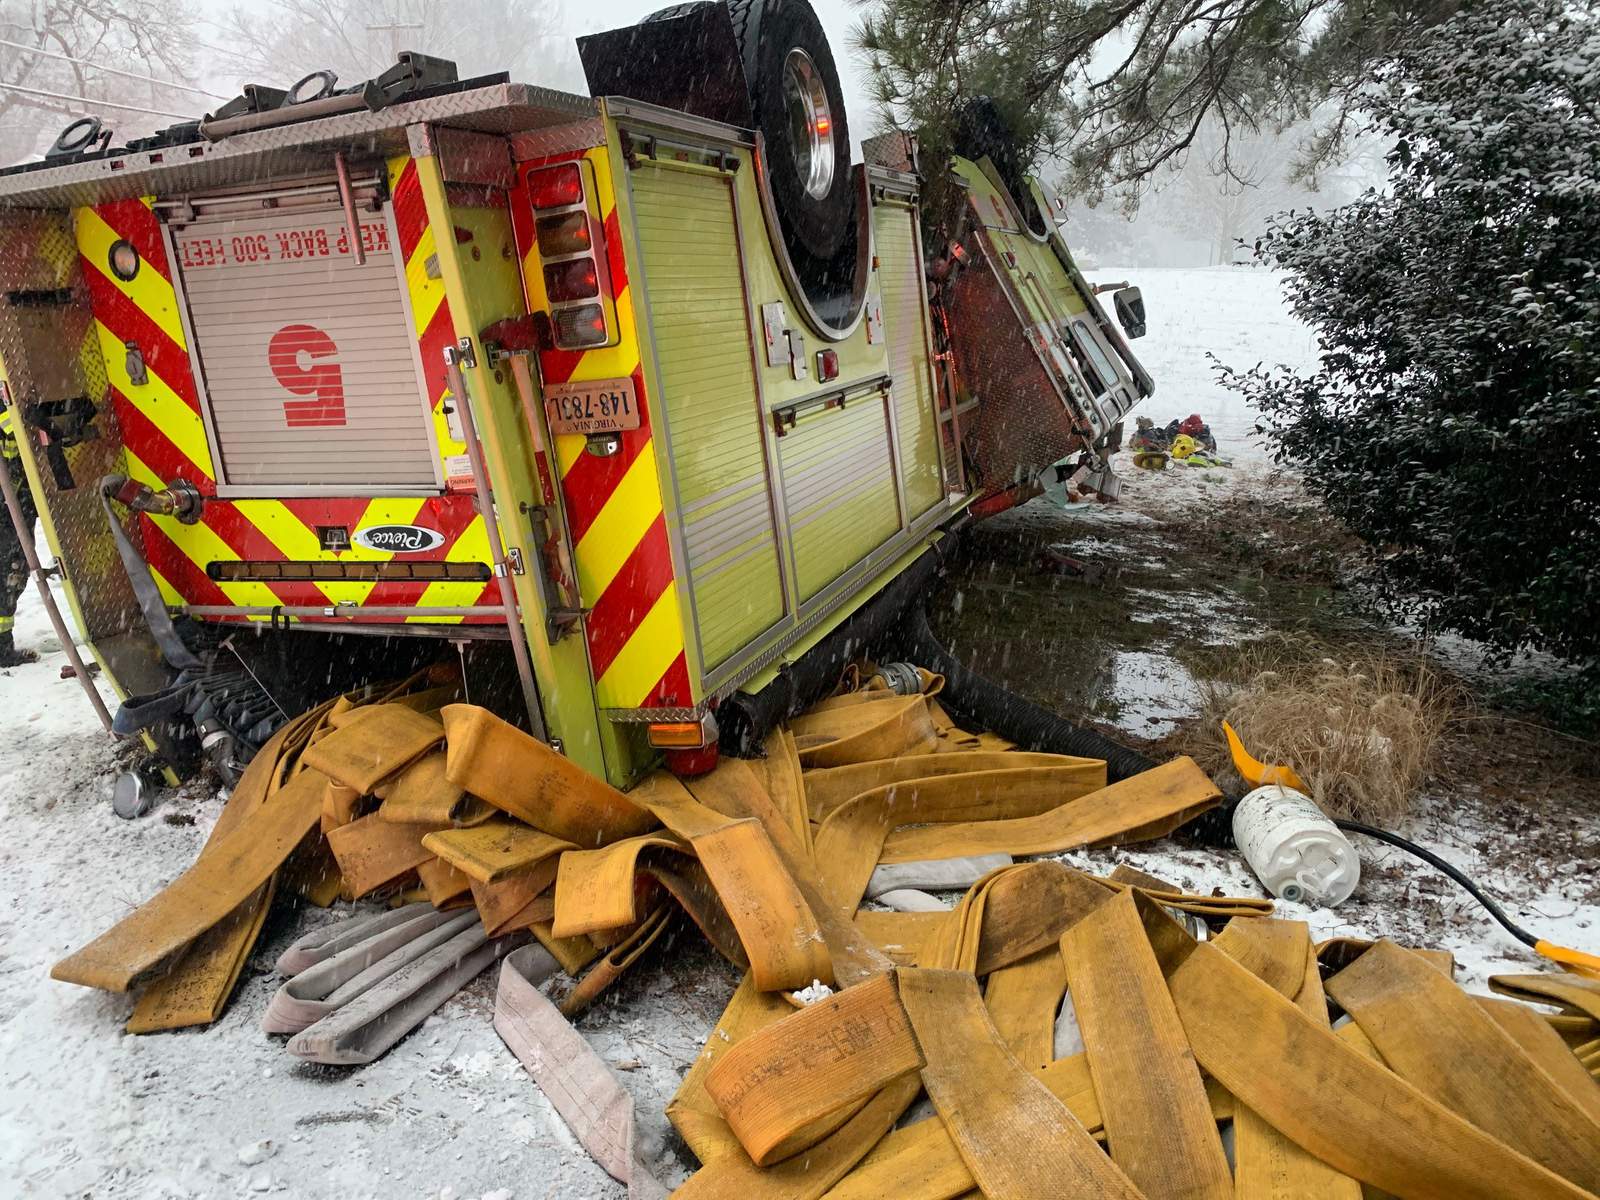 Fire truck rolls over in Henrico County due to snow-covered roads